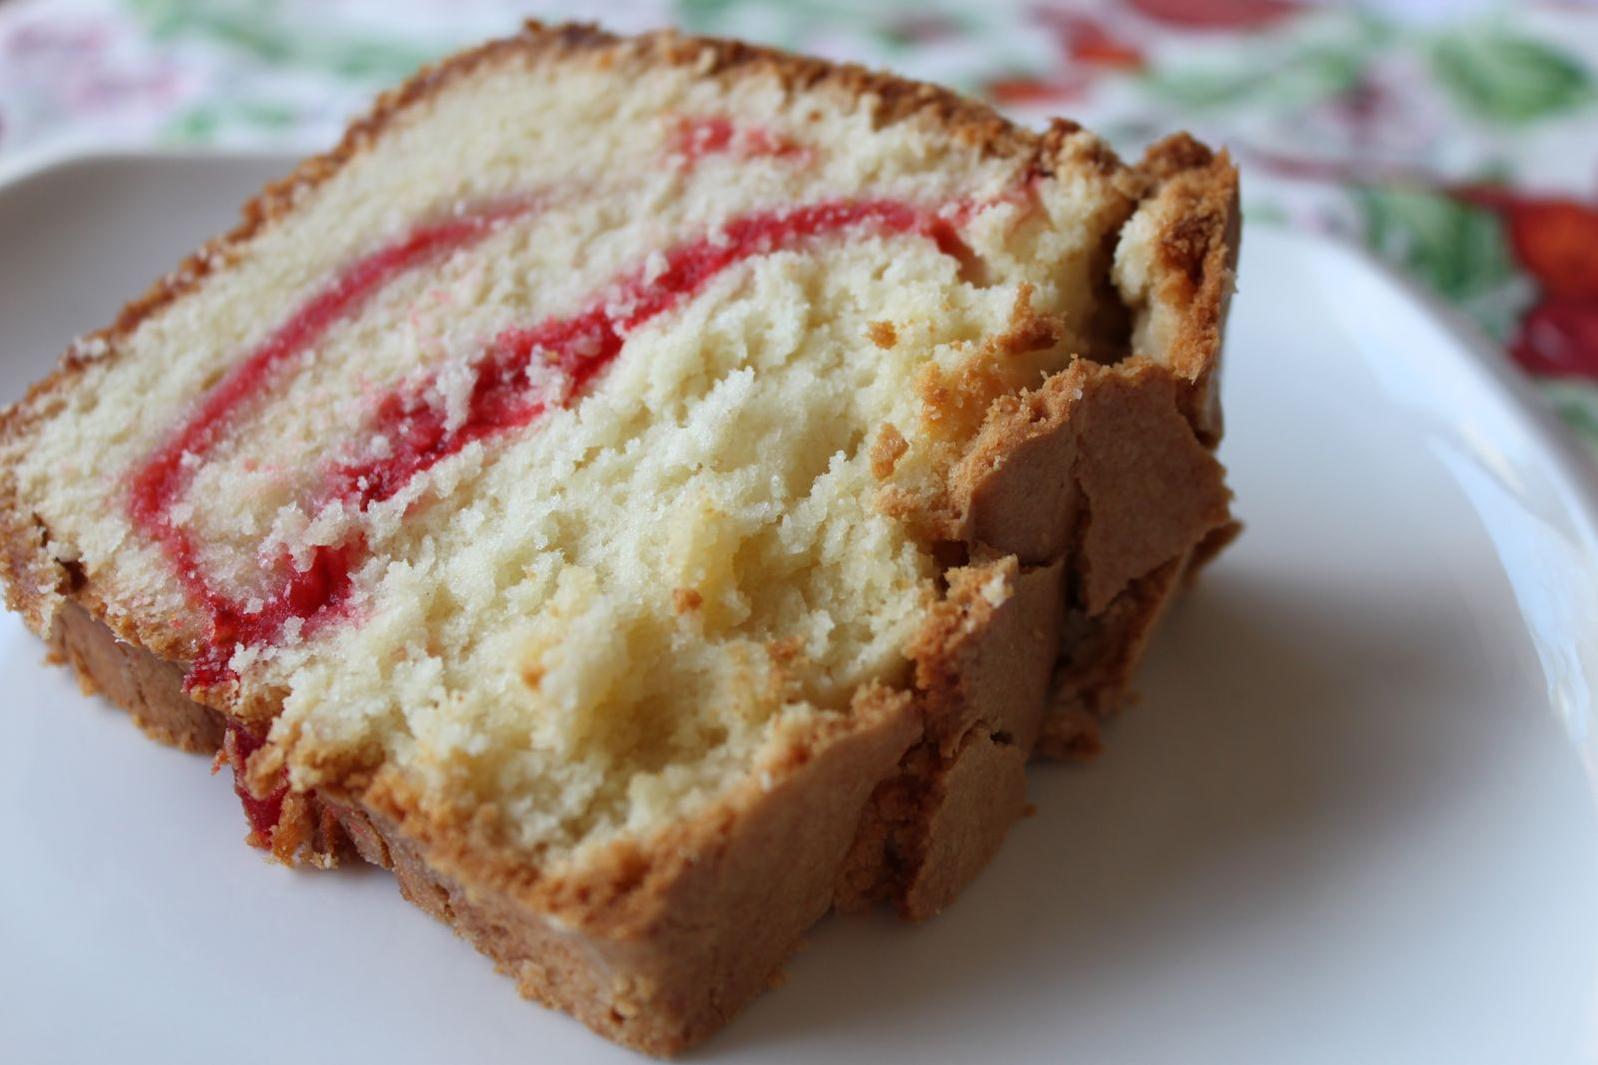  The addition of cream cheese lends a moist and tender texture to this pound cake.